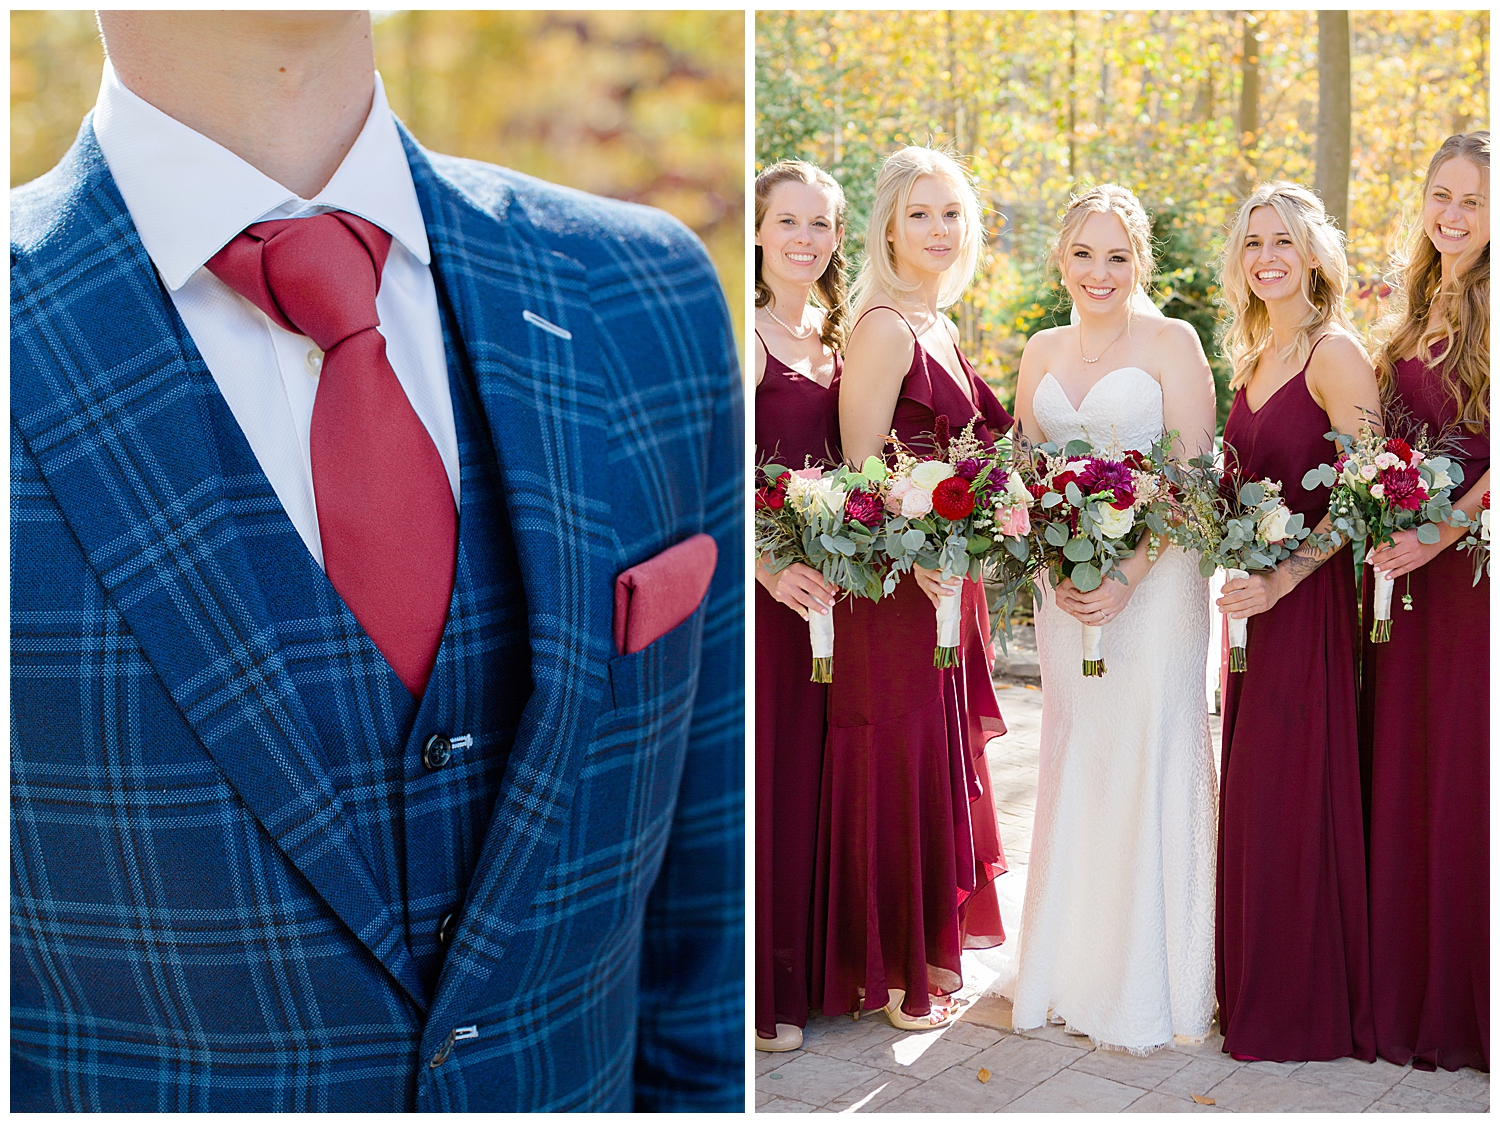 Sapphire_Creek_Winery_Chagrin_Falls_Wedding_Photography_Autumn_Cleveland_Kate_Mannella_Photography